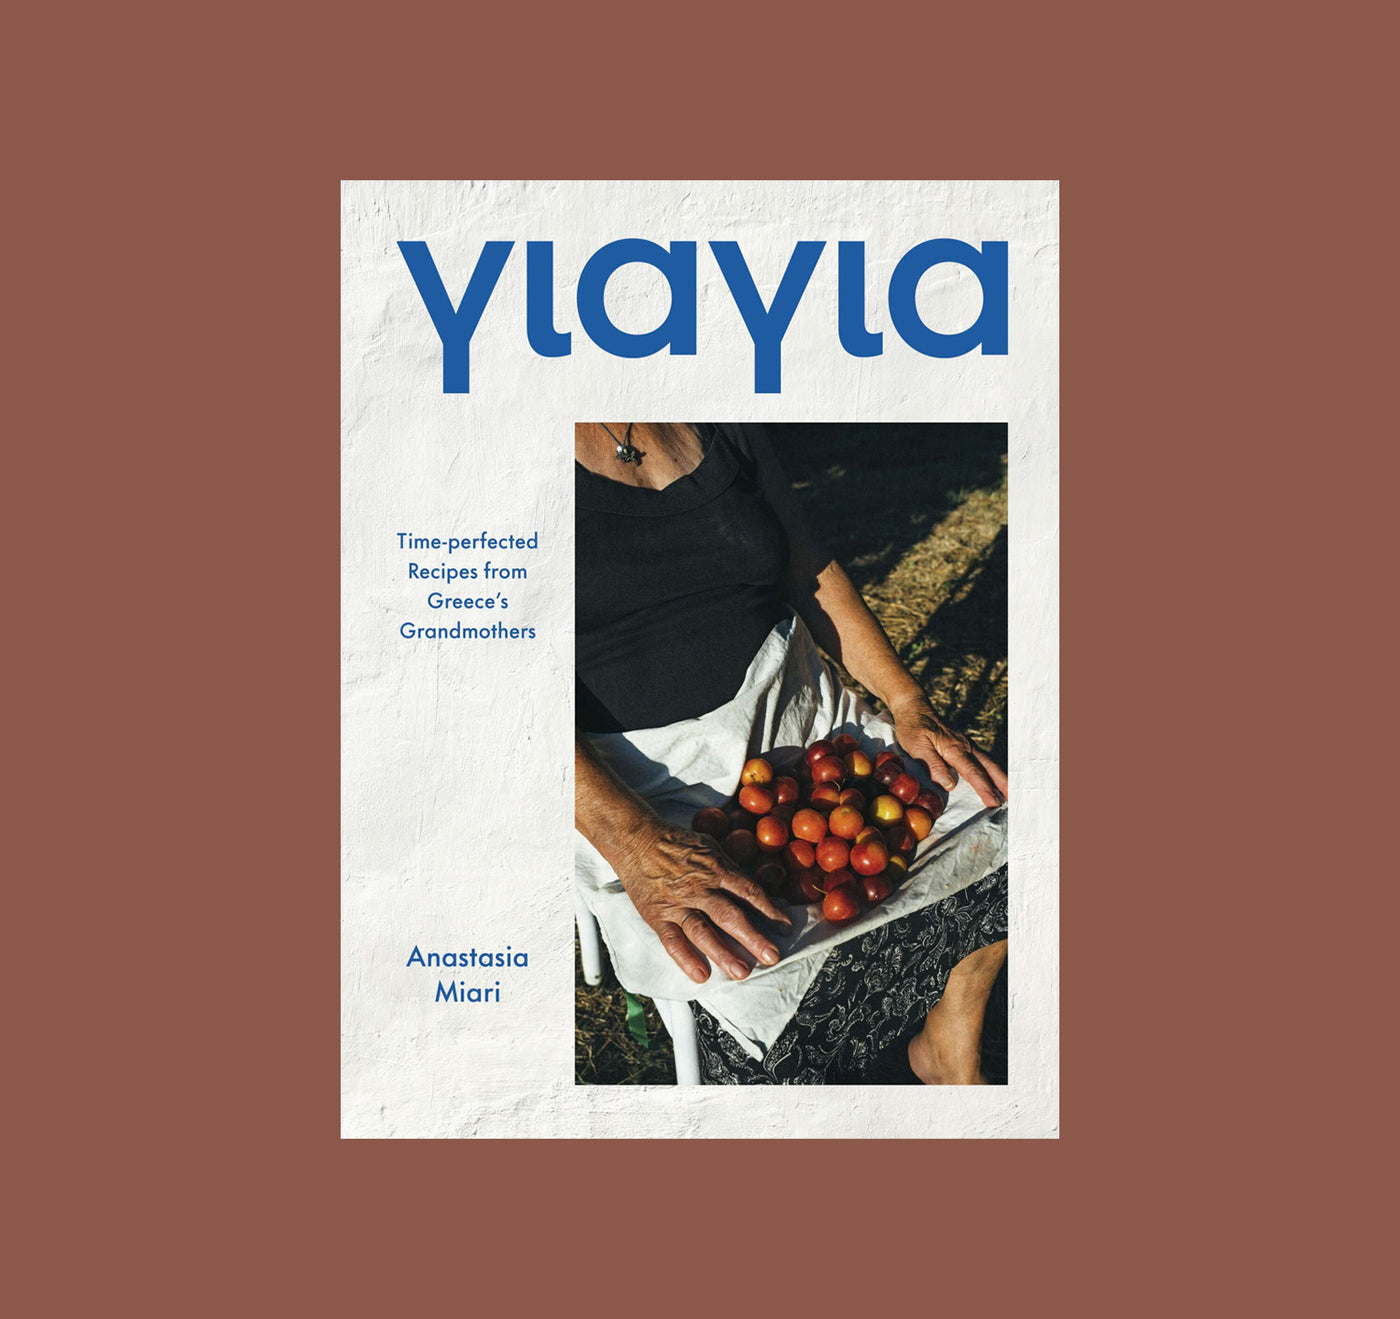 Yiayia - Time-perfected Recipes from Greece’s Grandmothers